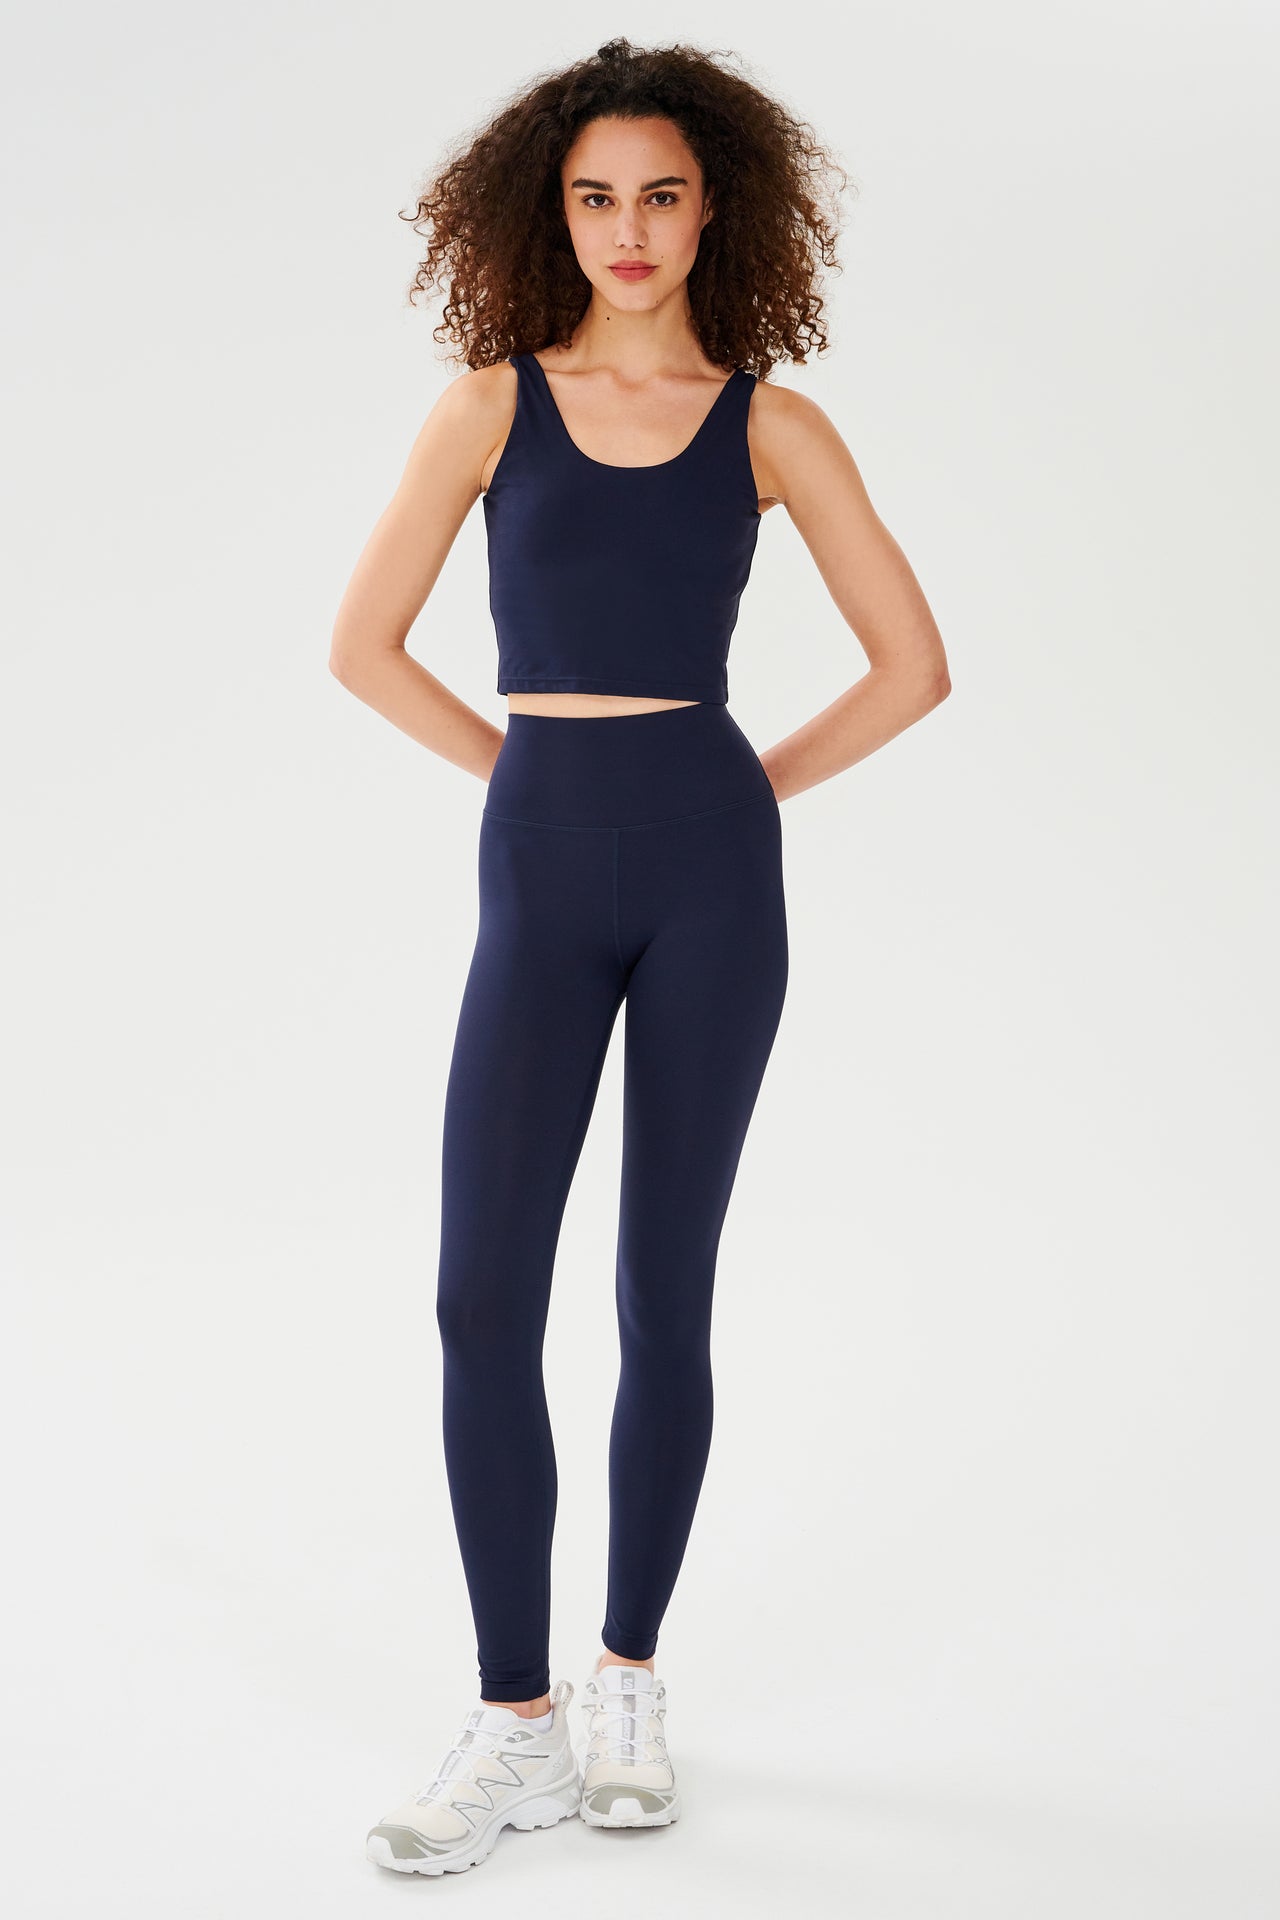 Front full view of woman with dark curly hair wearing dark blue high waist leggings and dark blue bra tank paired with white shoes 